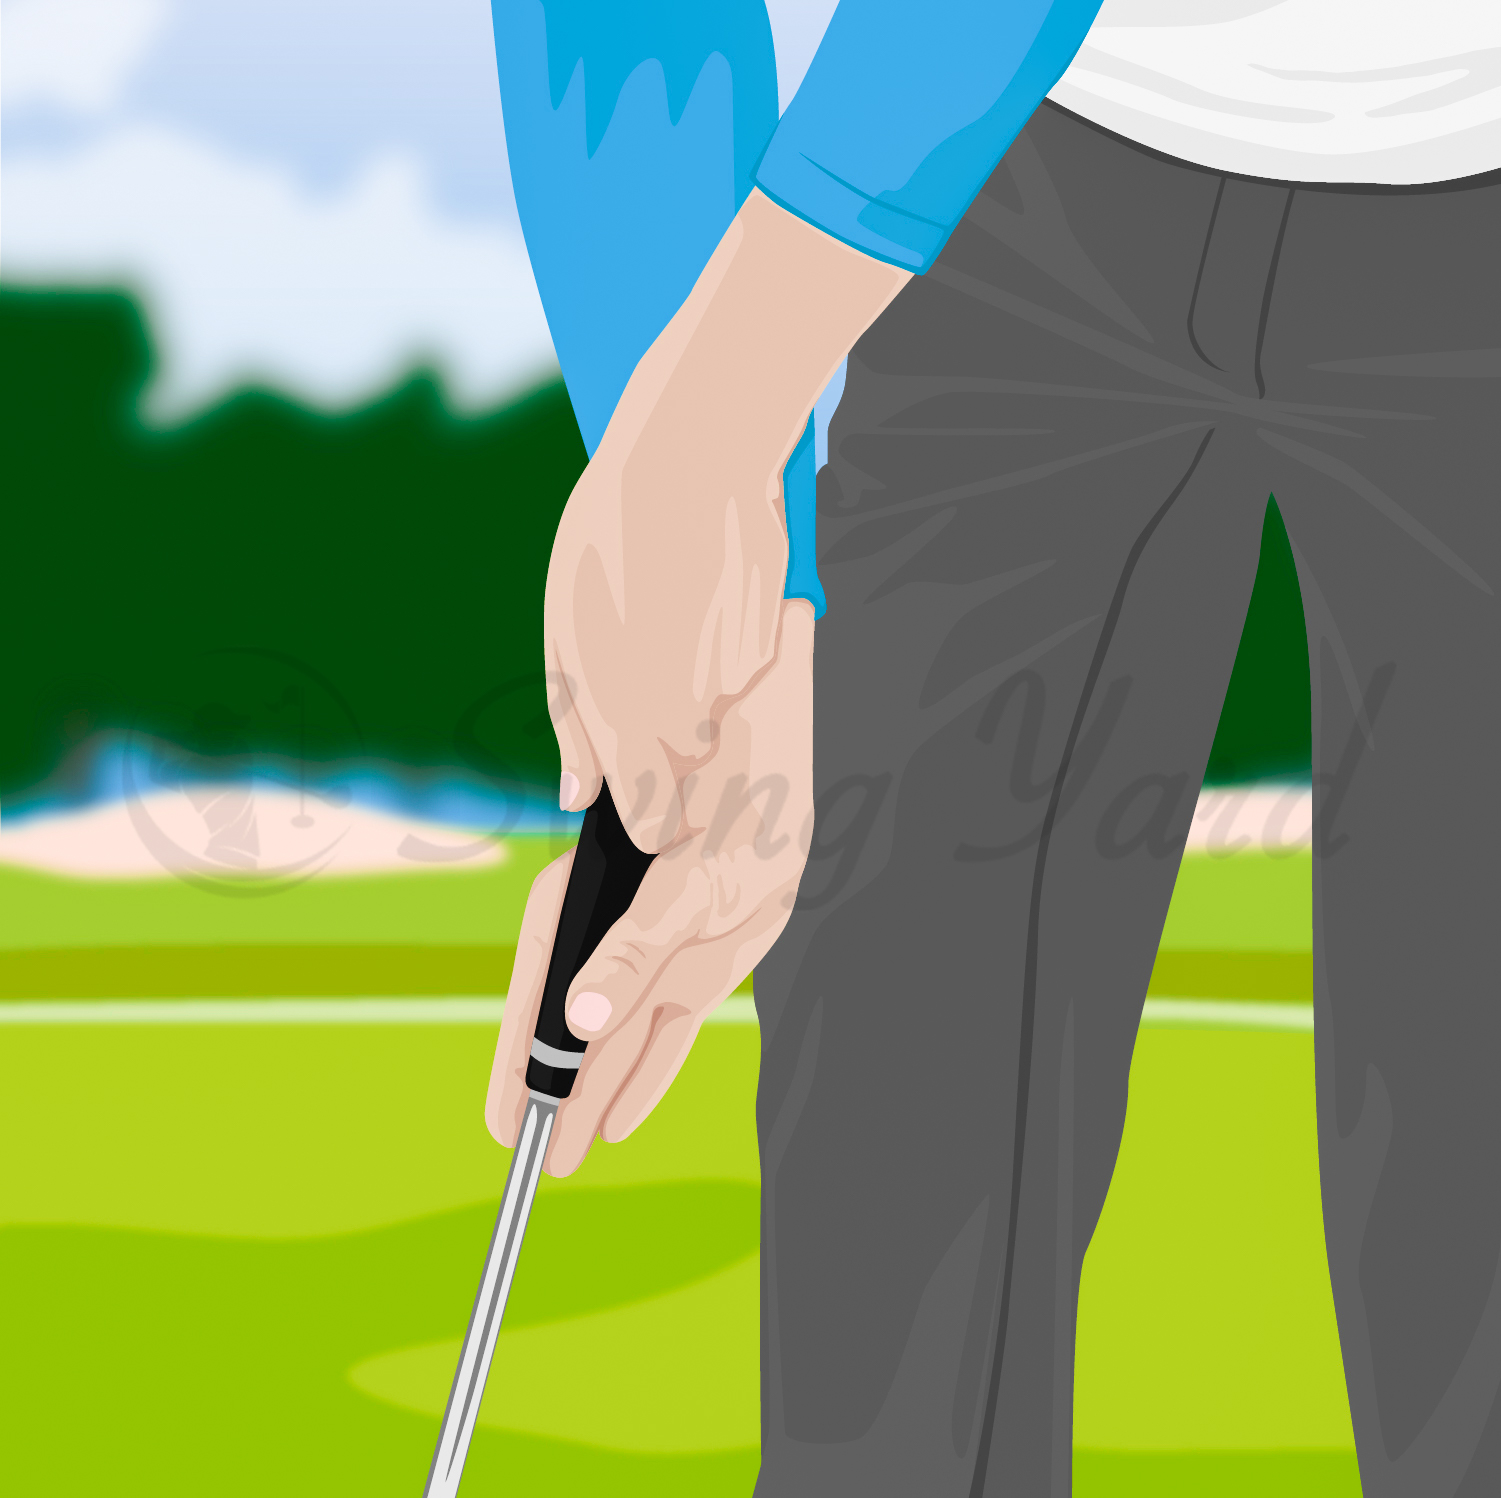 Side view of the pencil putting grip